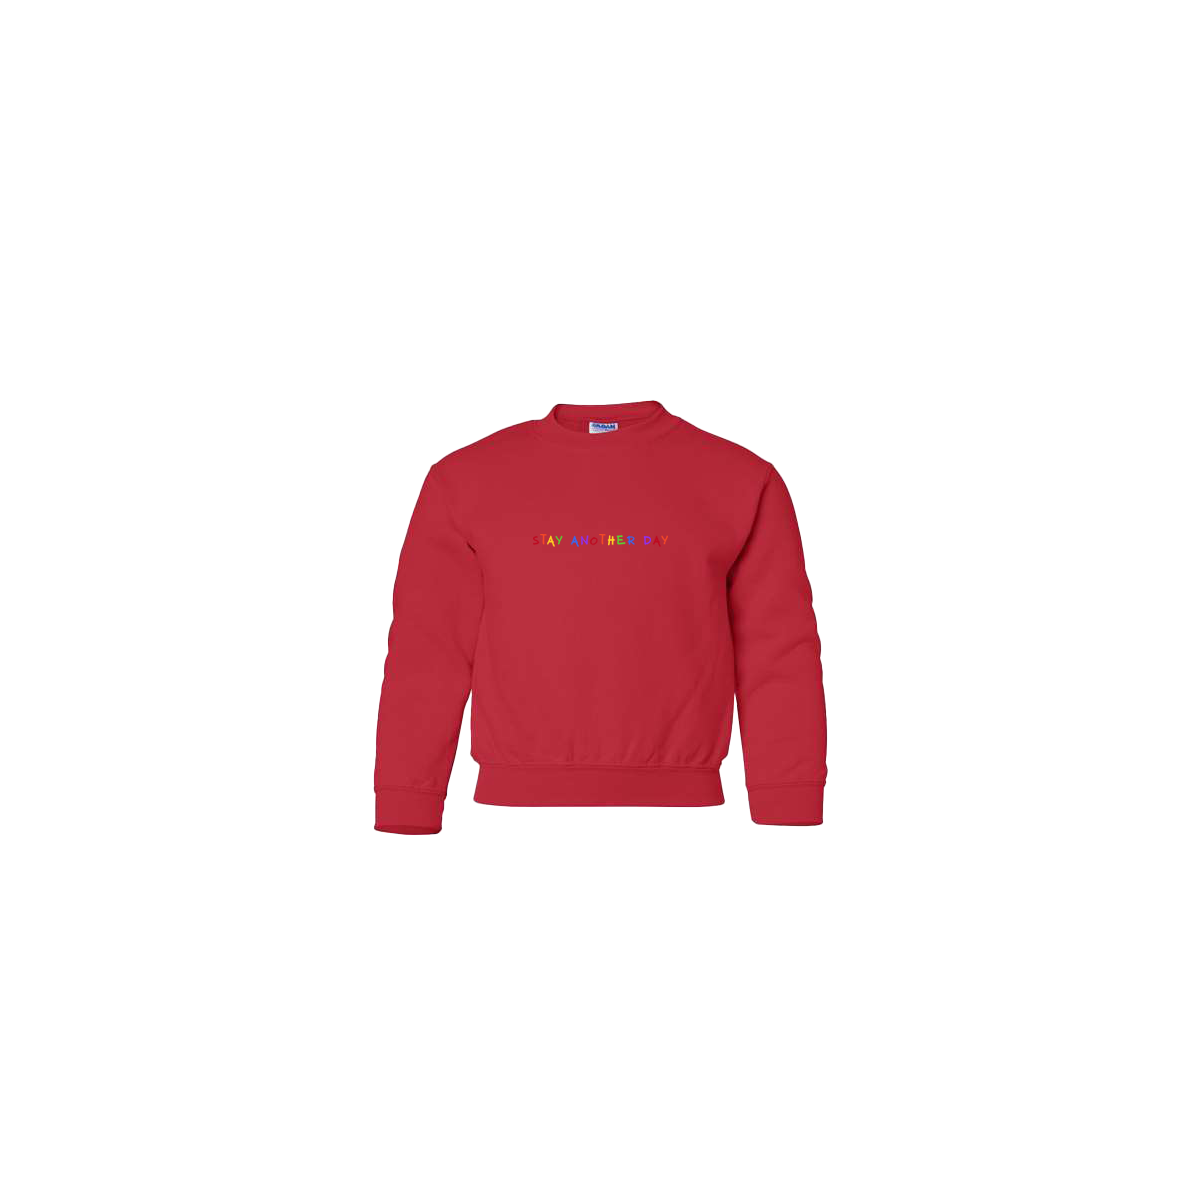 Stay Another Day Rainbow Embroidered Red Youth Crewneck